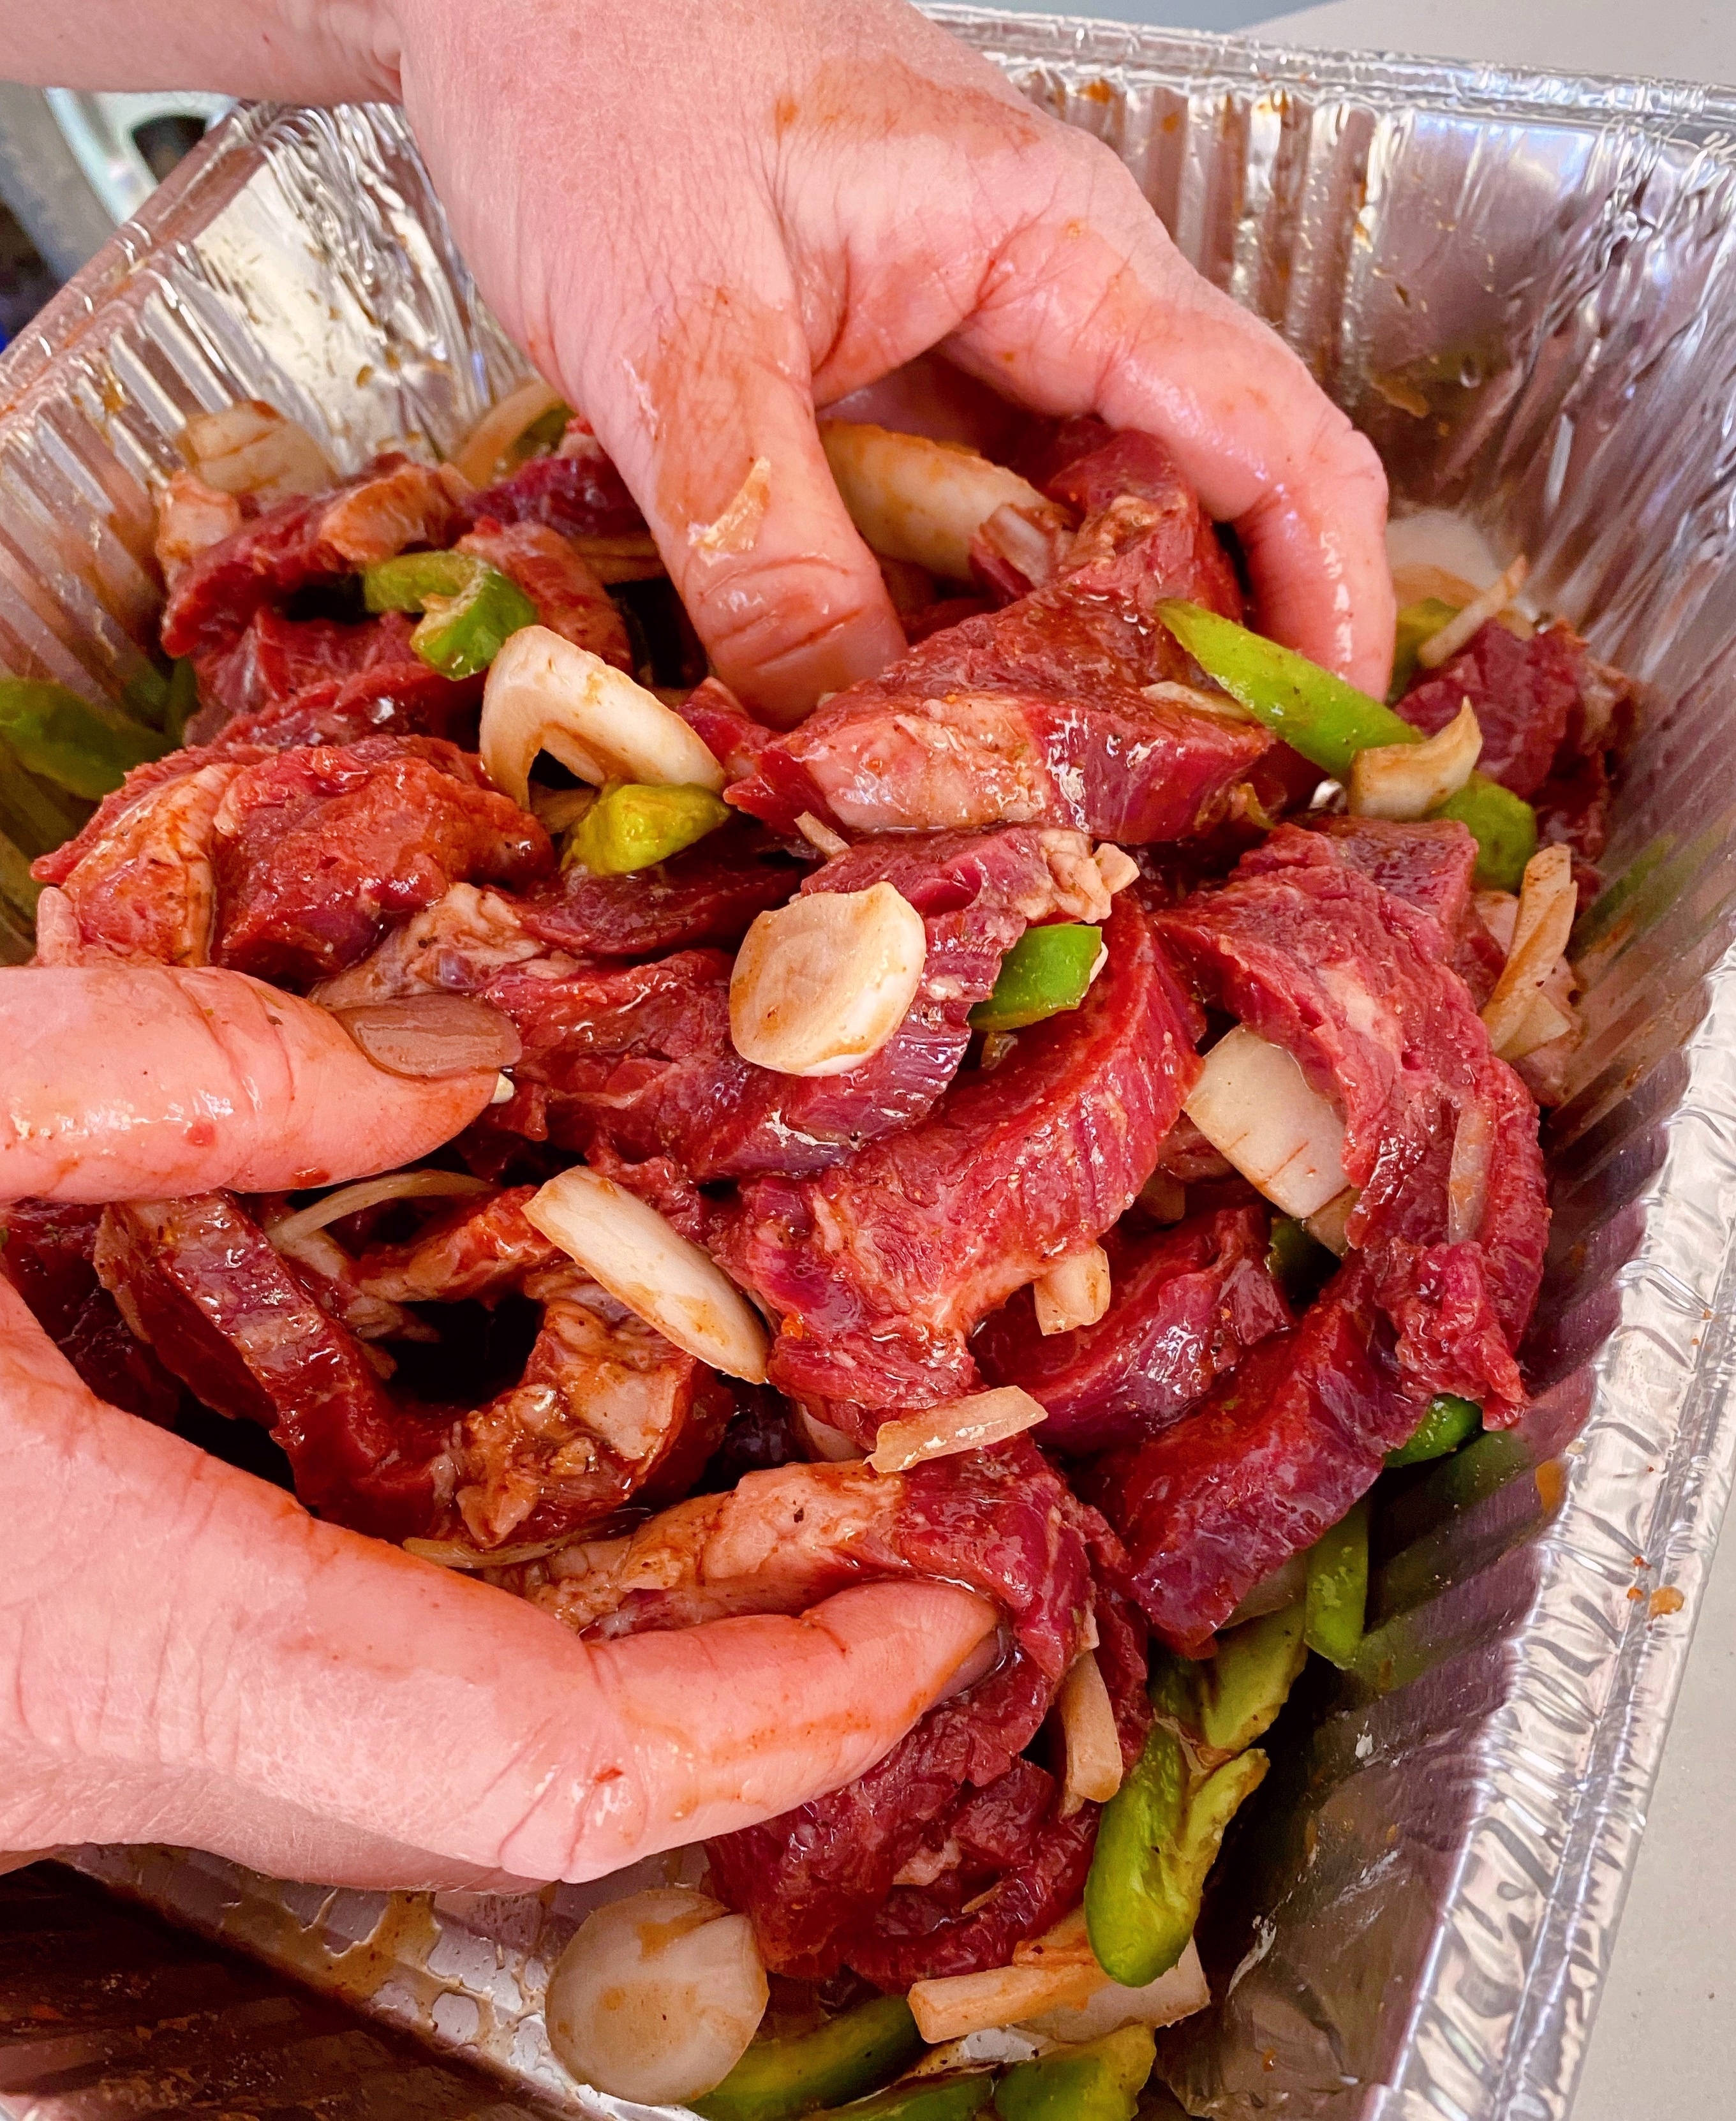 Tossing beat, peppers, and onions in marinade mixture.